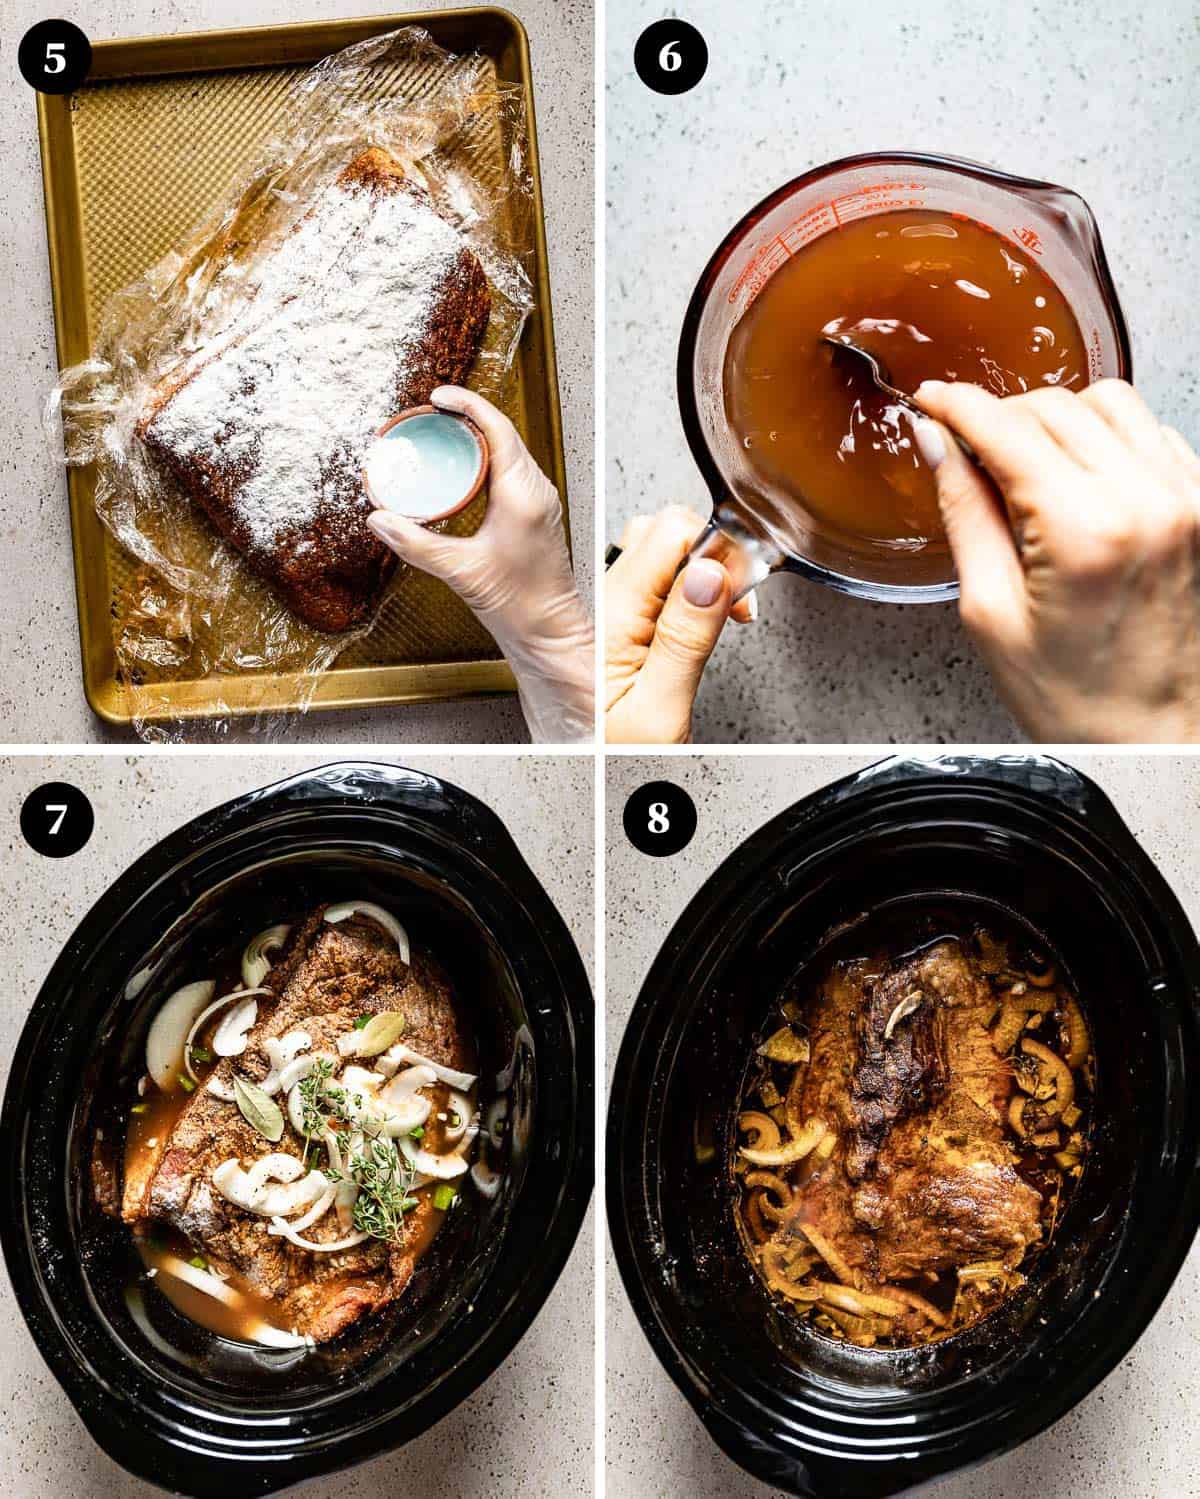 A collage of images showing how to make beef brisket in a crock pot for tacos.